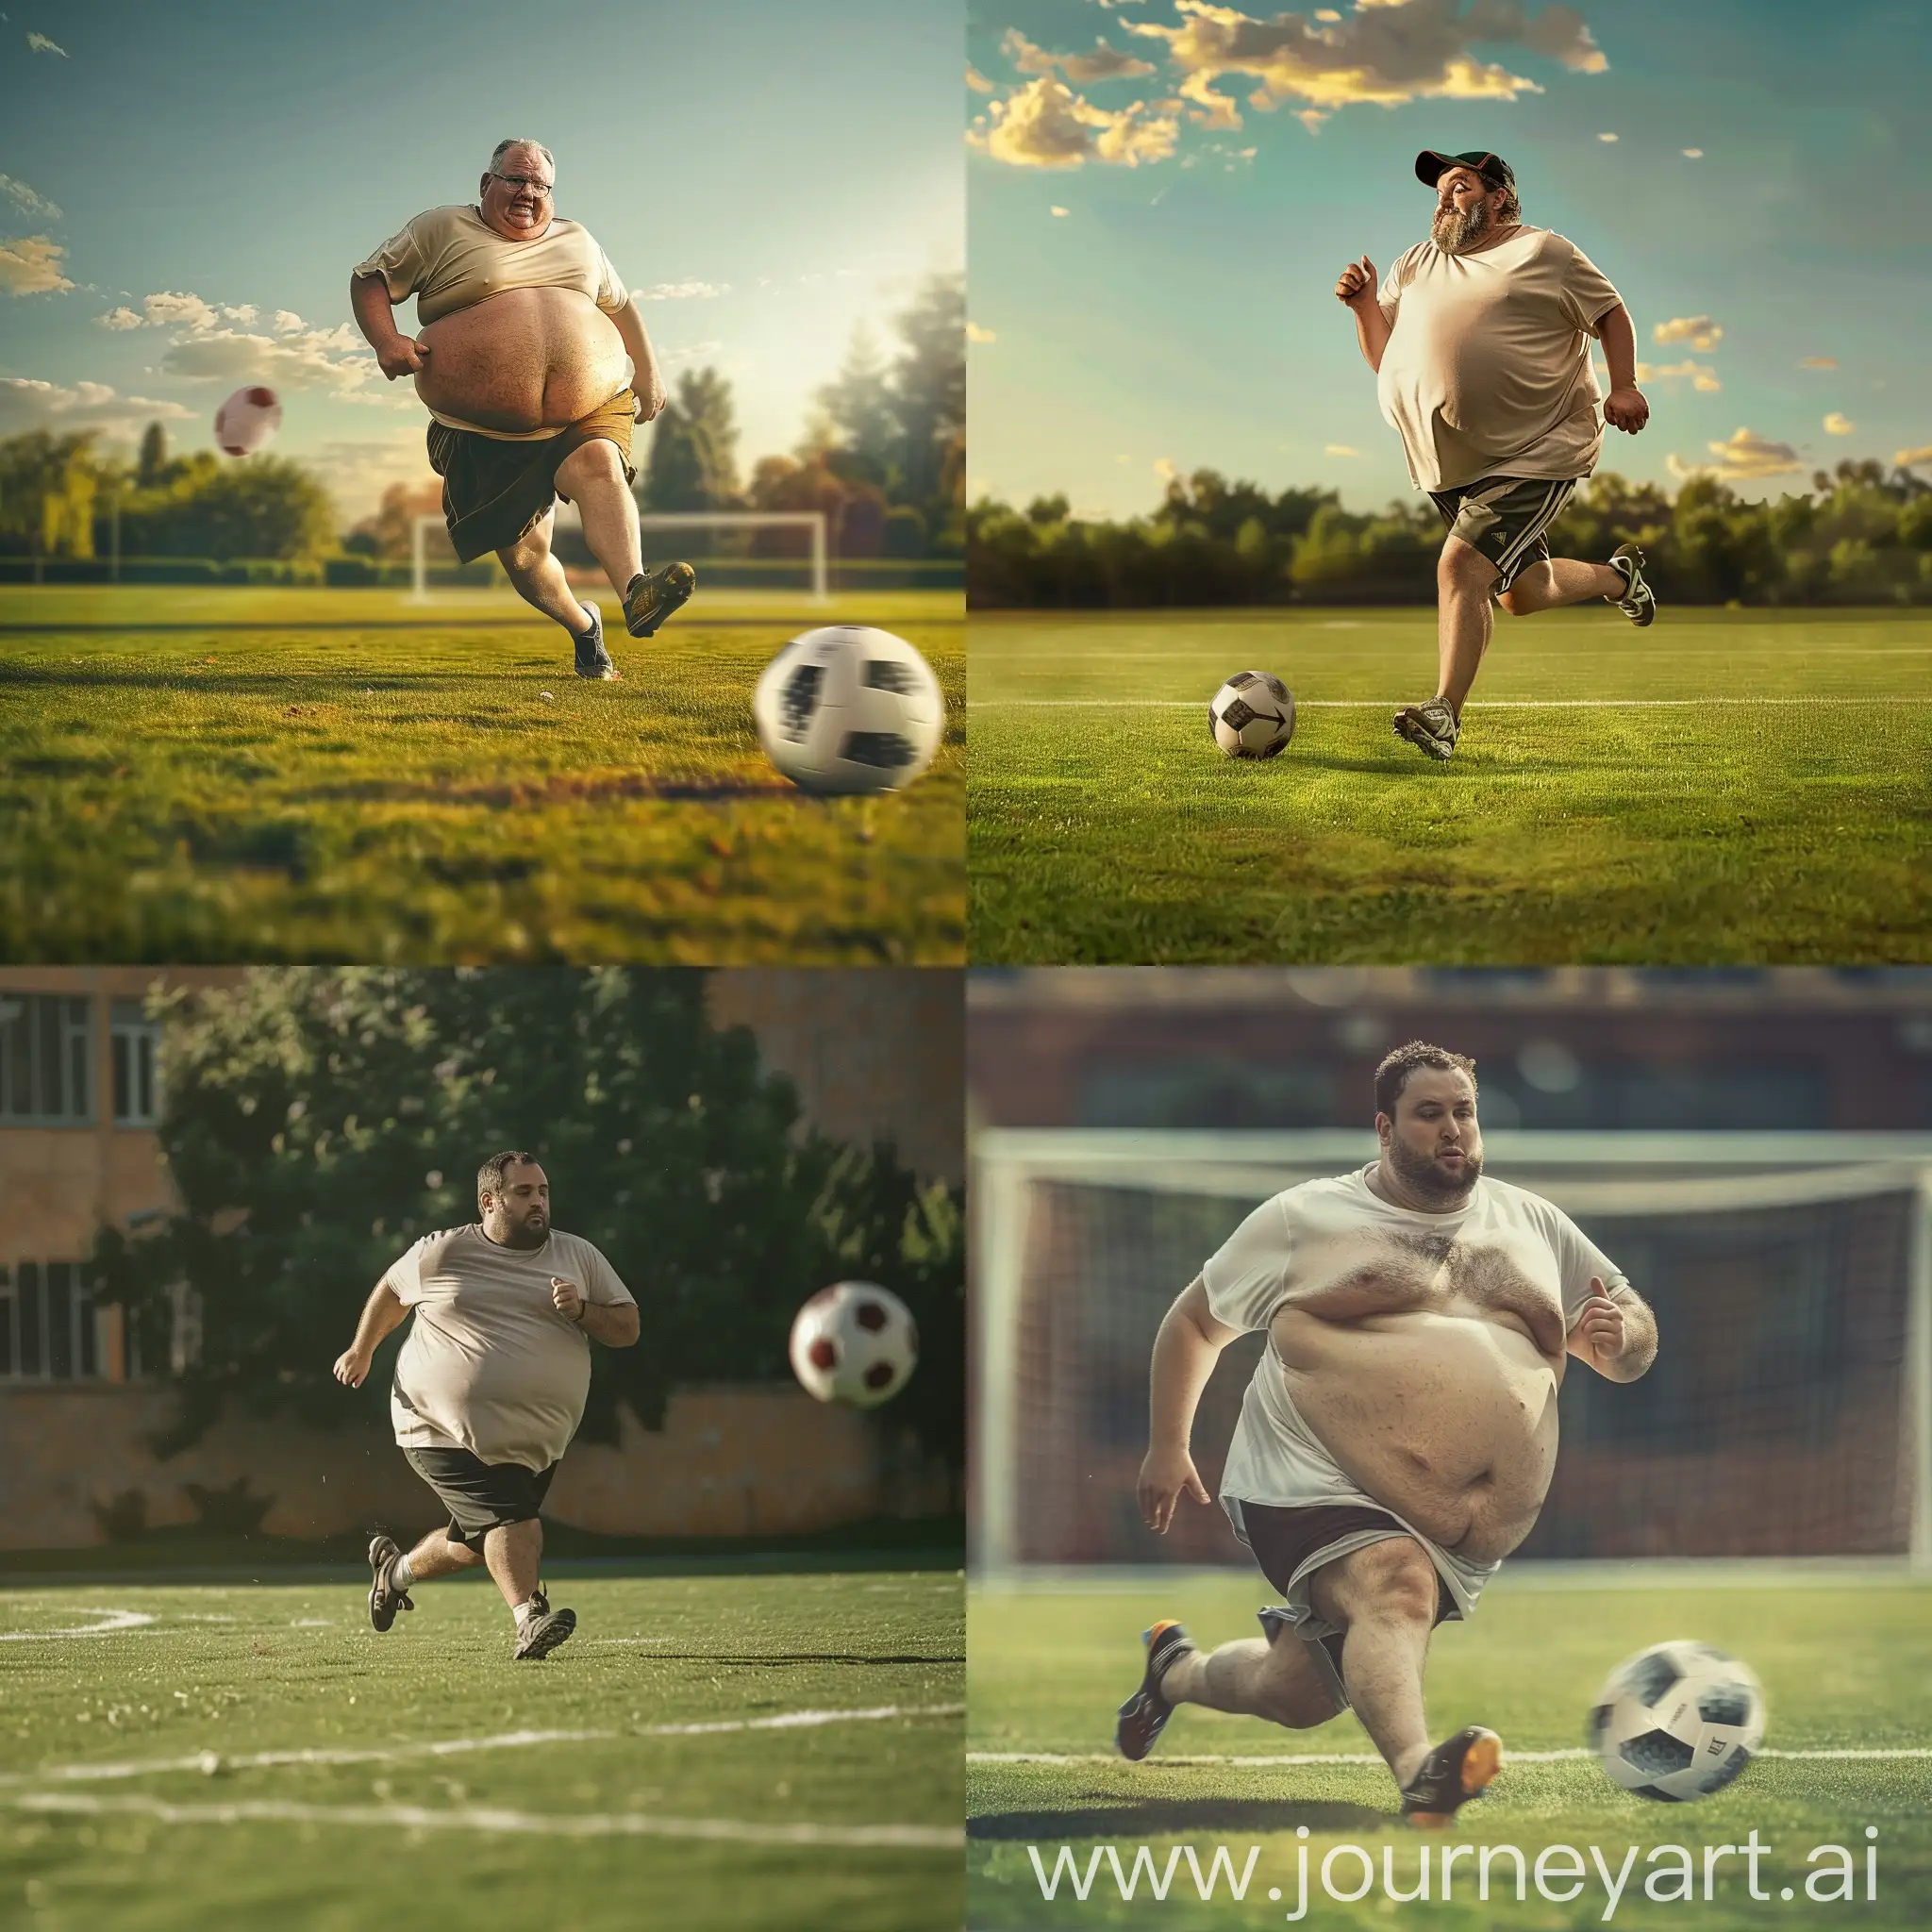 Overweight-Man-Jogging-on-Soccer-Field